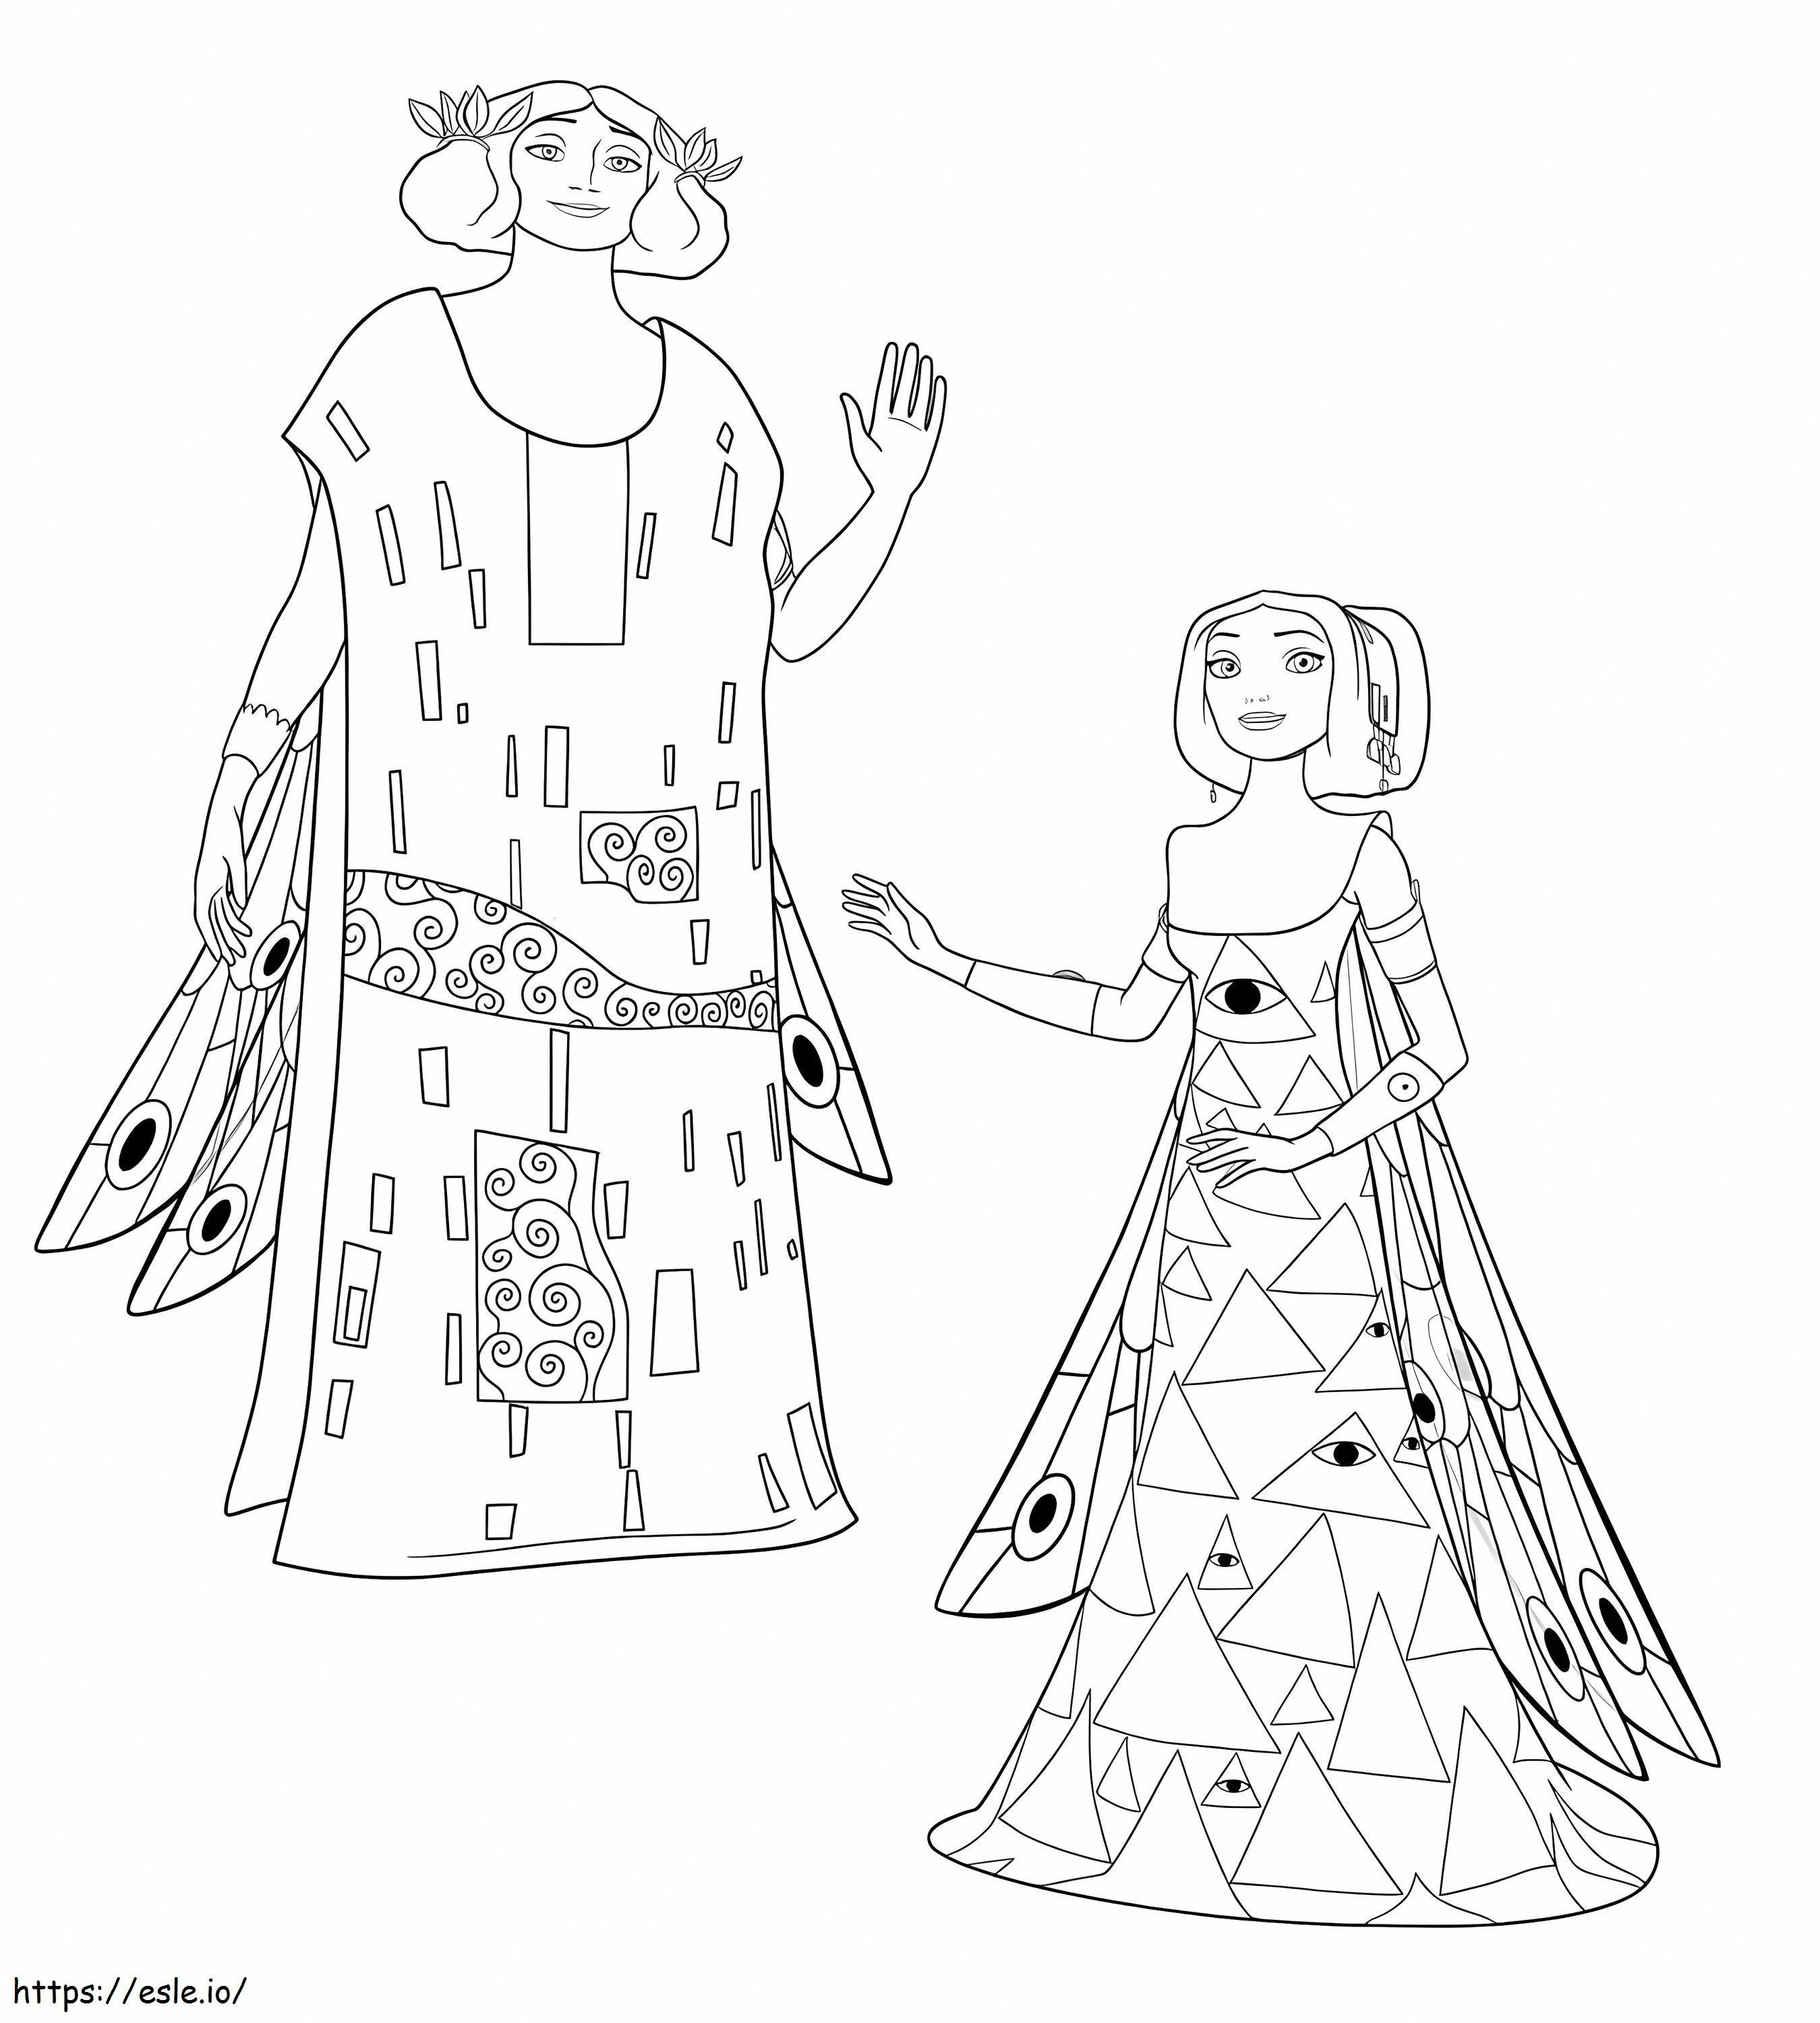 King Raynor And Queen Mayla From Mia And Me coloring page